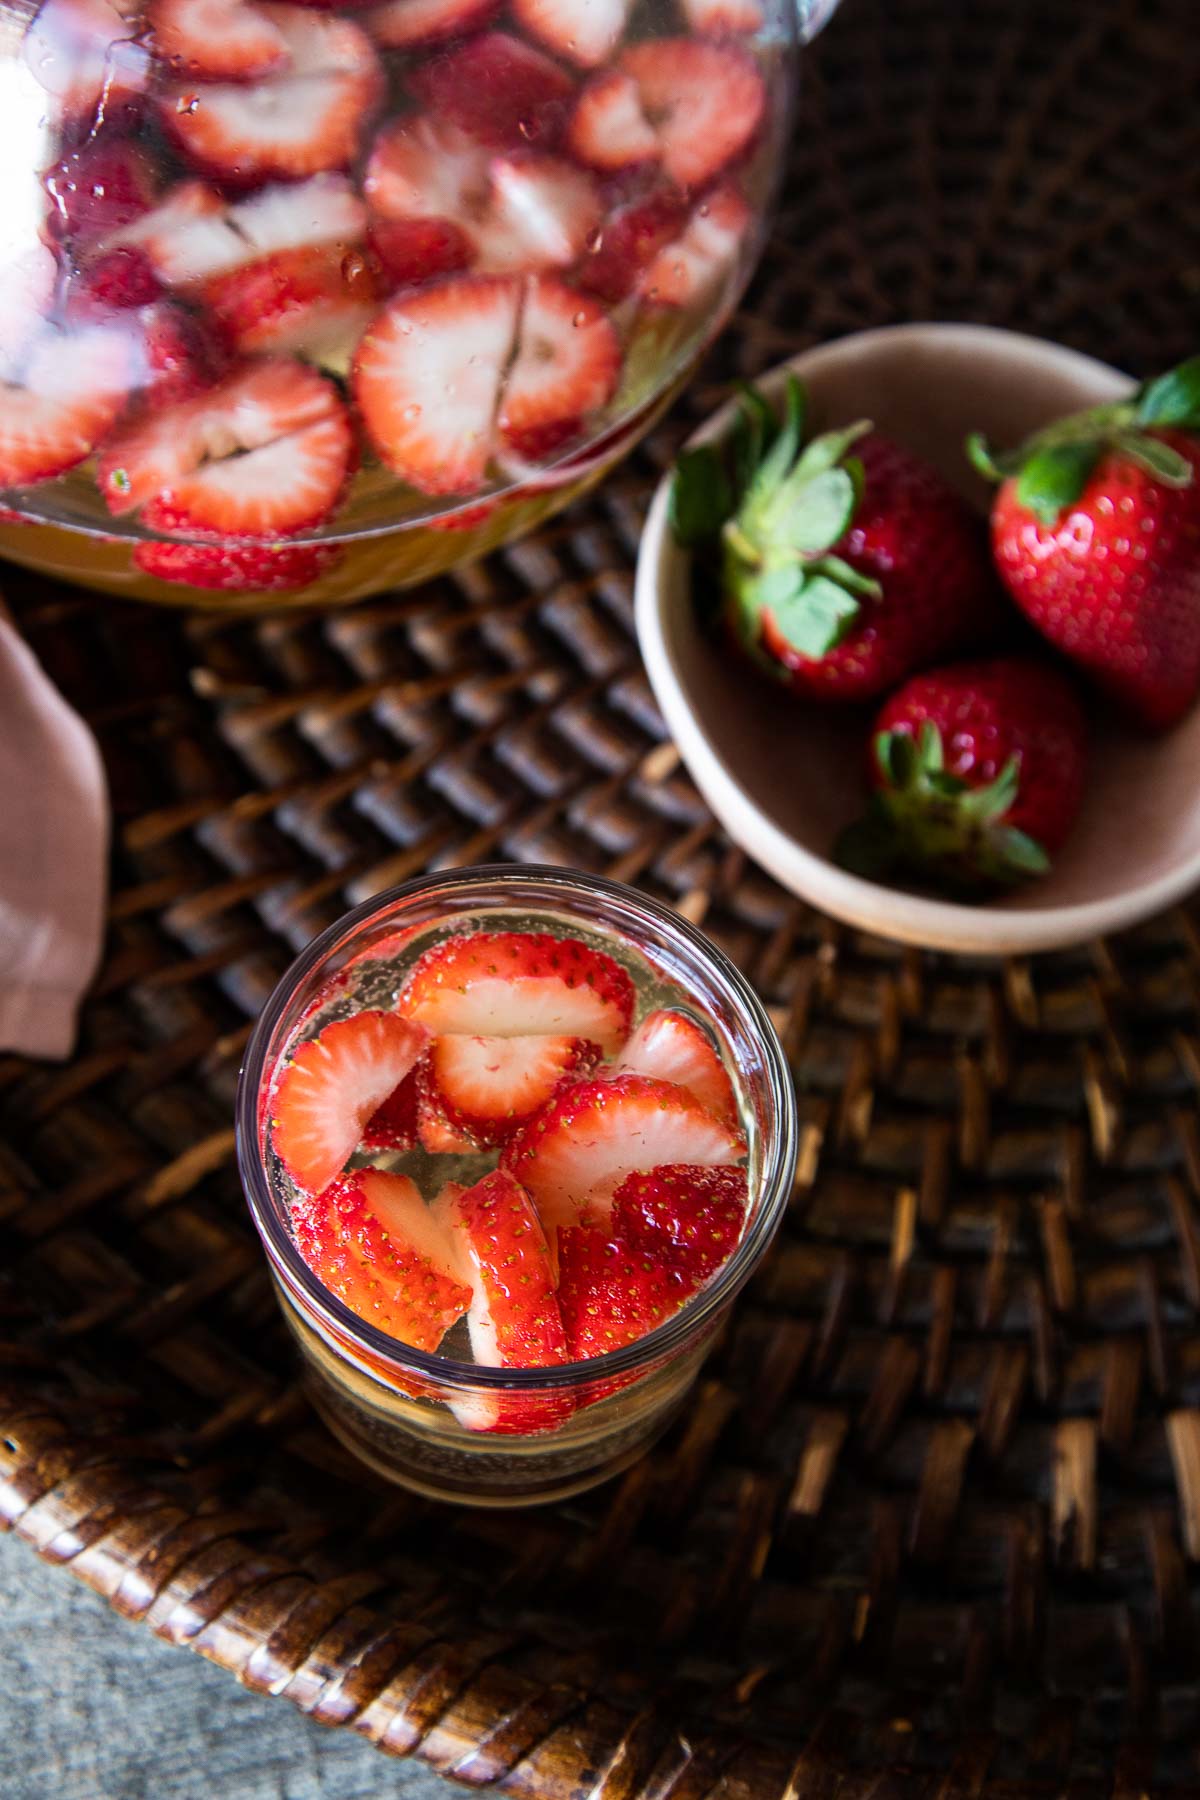 Strawberry sangria in glass - top down photo with cut up strawberries